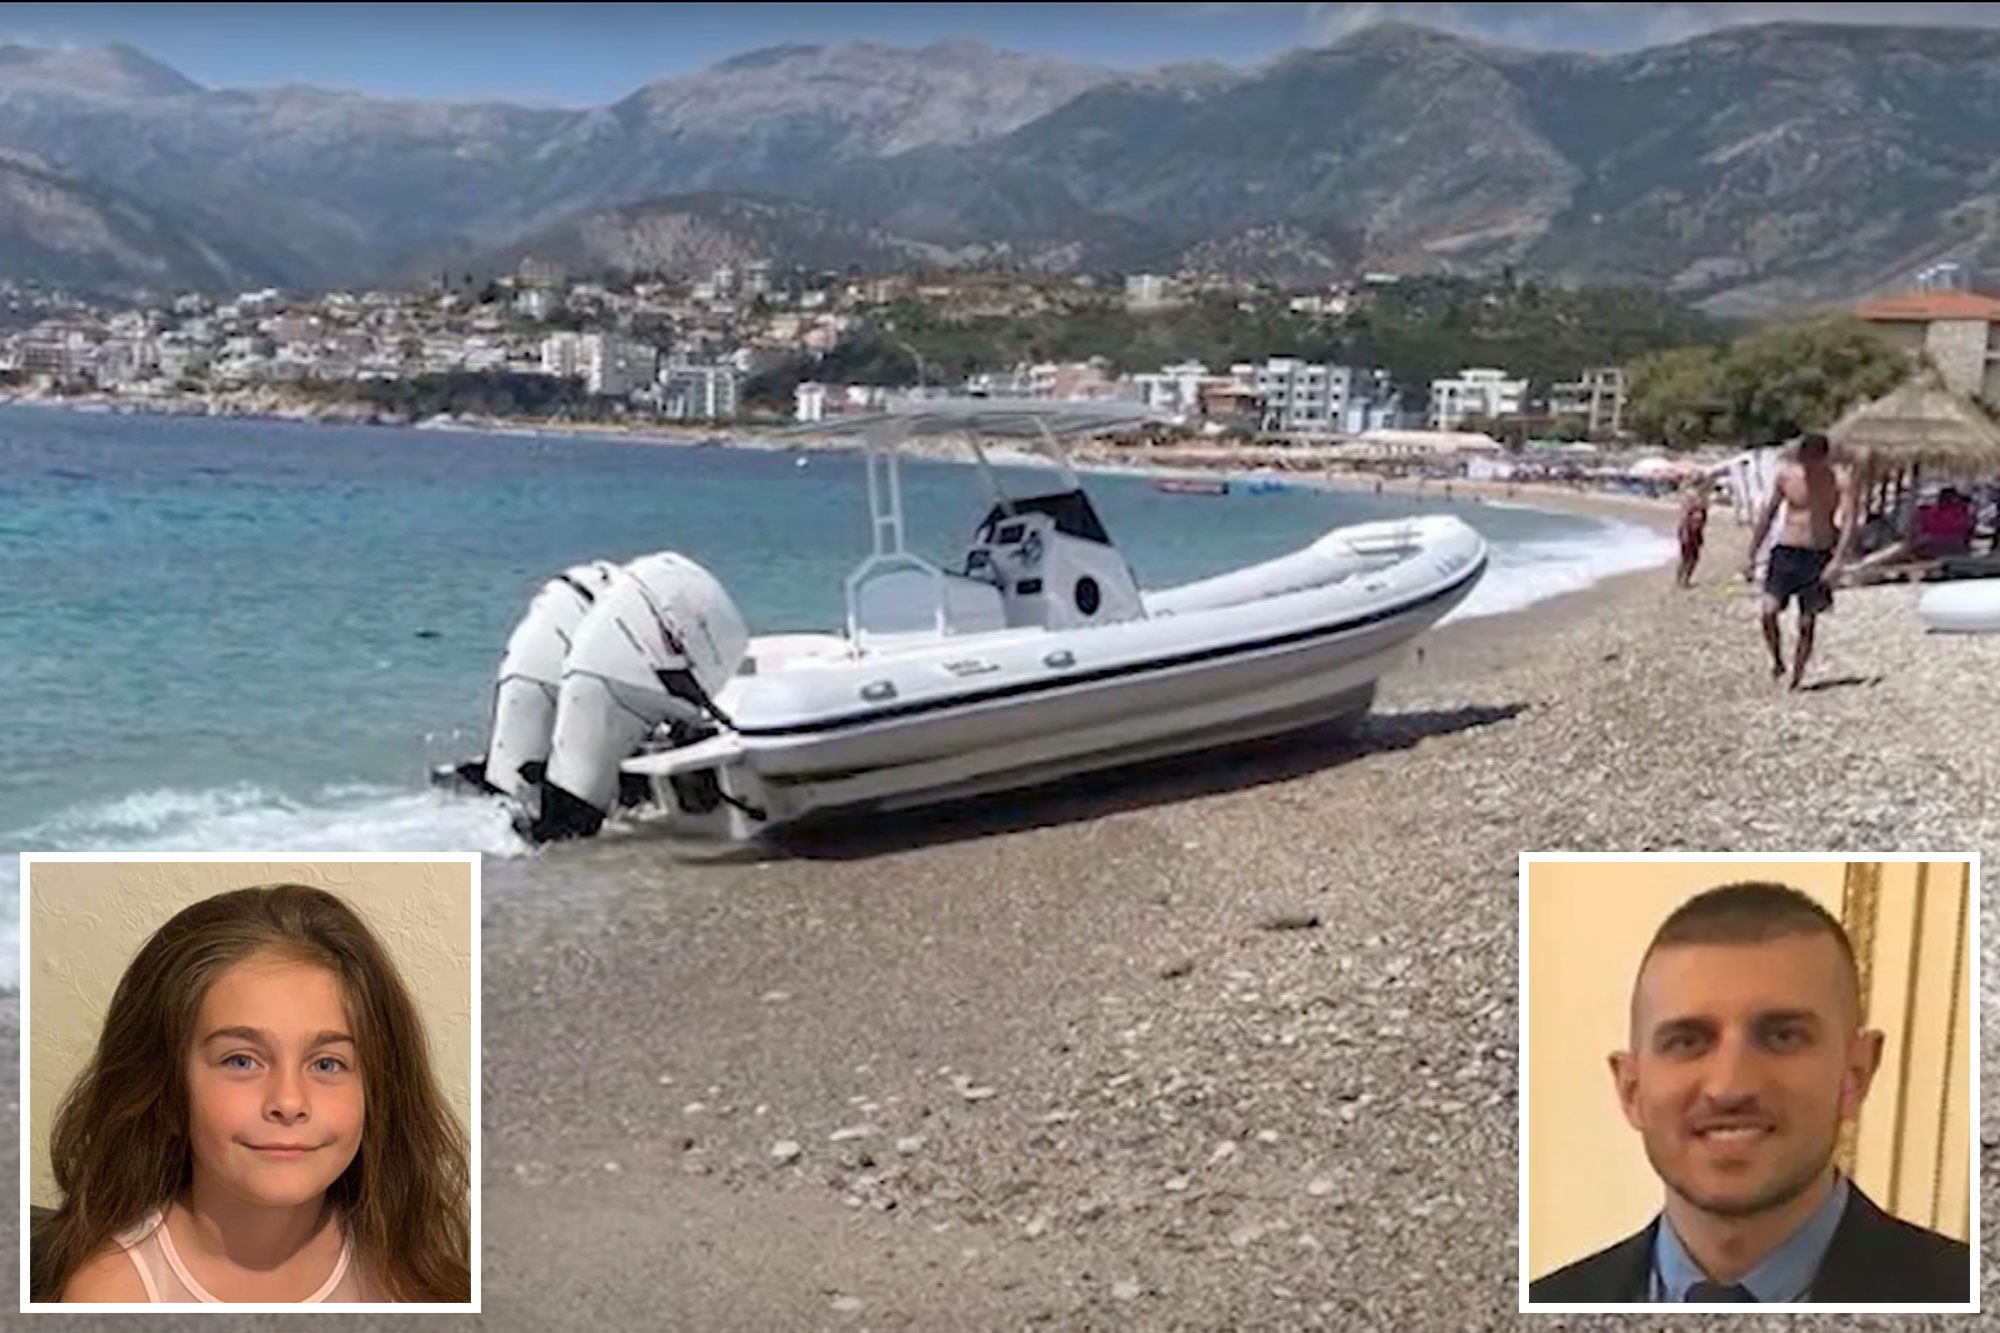 A devastated father fought an Albanian police commissioner on the beach after the cop allegedly crashed his boat into his 7-year-old British daughter, killing her. The girl, Jonada Avdia, a British-born citizen, was killed on Tuesday while playing in the ocean when she was hit by a speedboat’s propeller off Potam Beach in Albania. The boat was driven by officer Arjan Tase while he was off-duty, according to reports. When Tase parked his boat on the shore right after the fatal crash, her father Bedlar Avdia confronted his daughter’s alleged killer and a brawl ensued, photos shared by Albania’s former prime minister Sali Berisha show, the Daily Mail reported. https://www.youtube.com/watch?v=zvO7BBt5Ceo